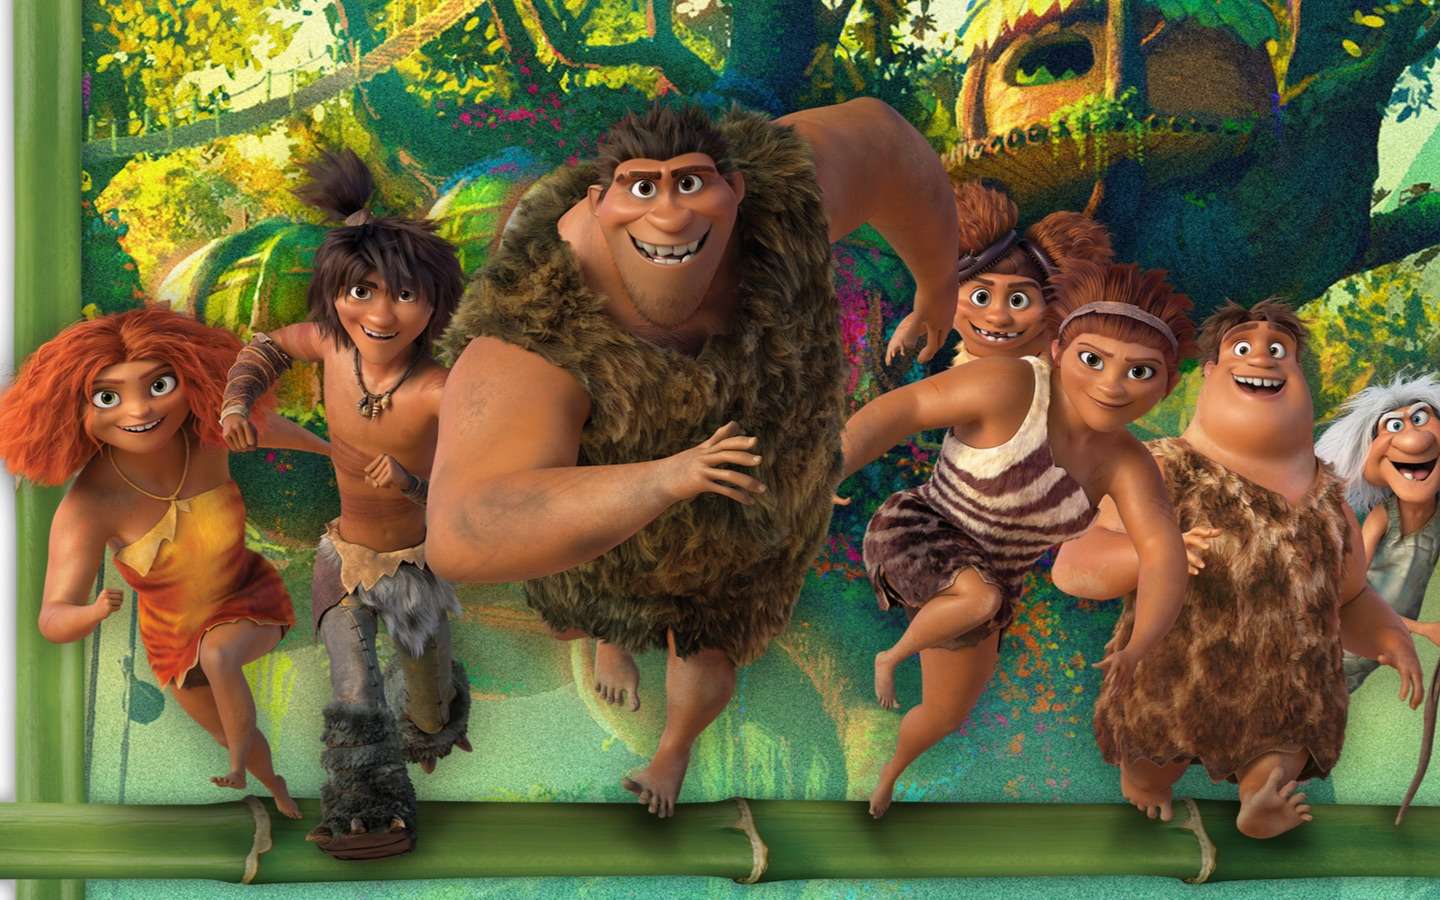 The Croods: A New Age confirms watch party from DreamWorks Animation from V...